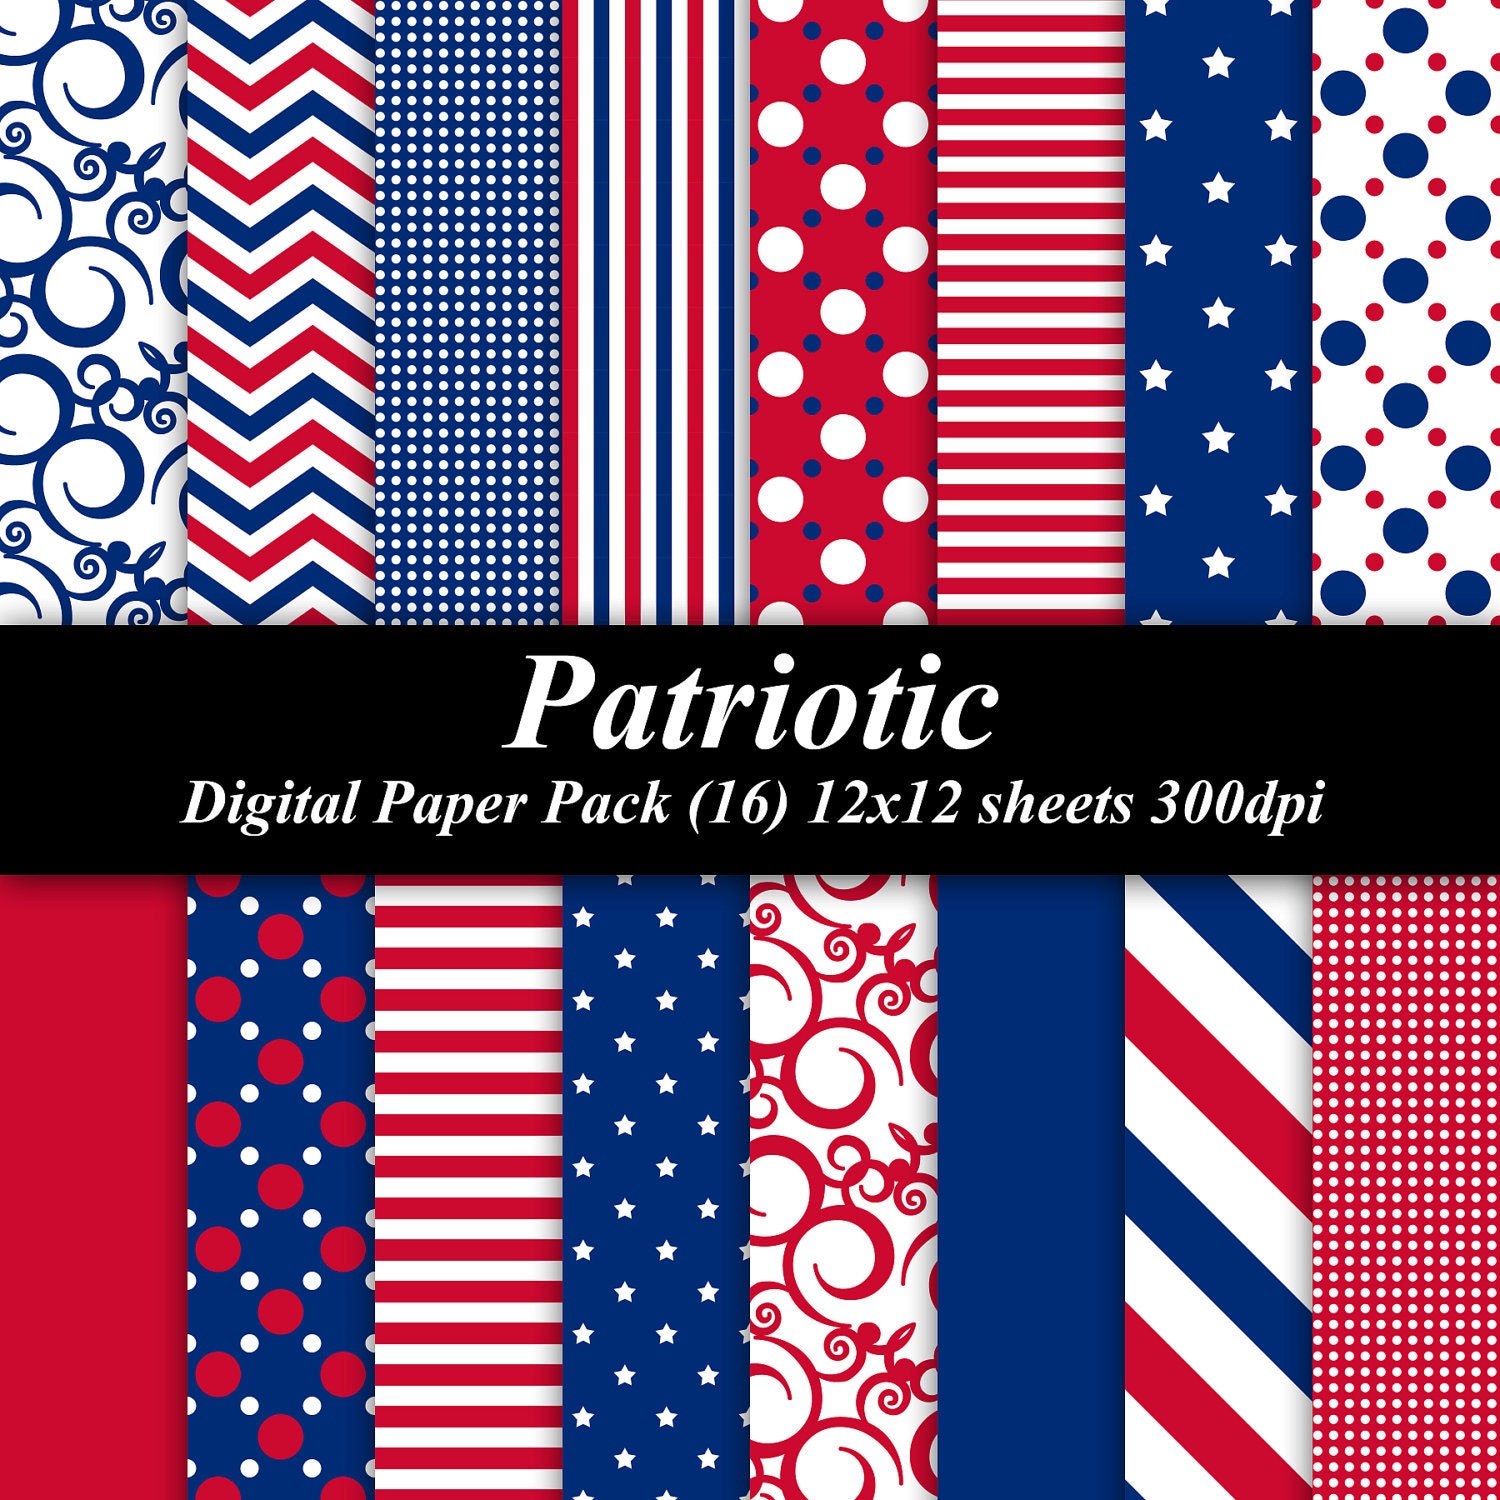 BUY 2 GET 1 FREE - Patriotic Digital Paper Pack (16) 12x12 sheets 300 dpi scrapbooking invitations 4th of July Independence red white blue